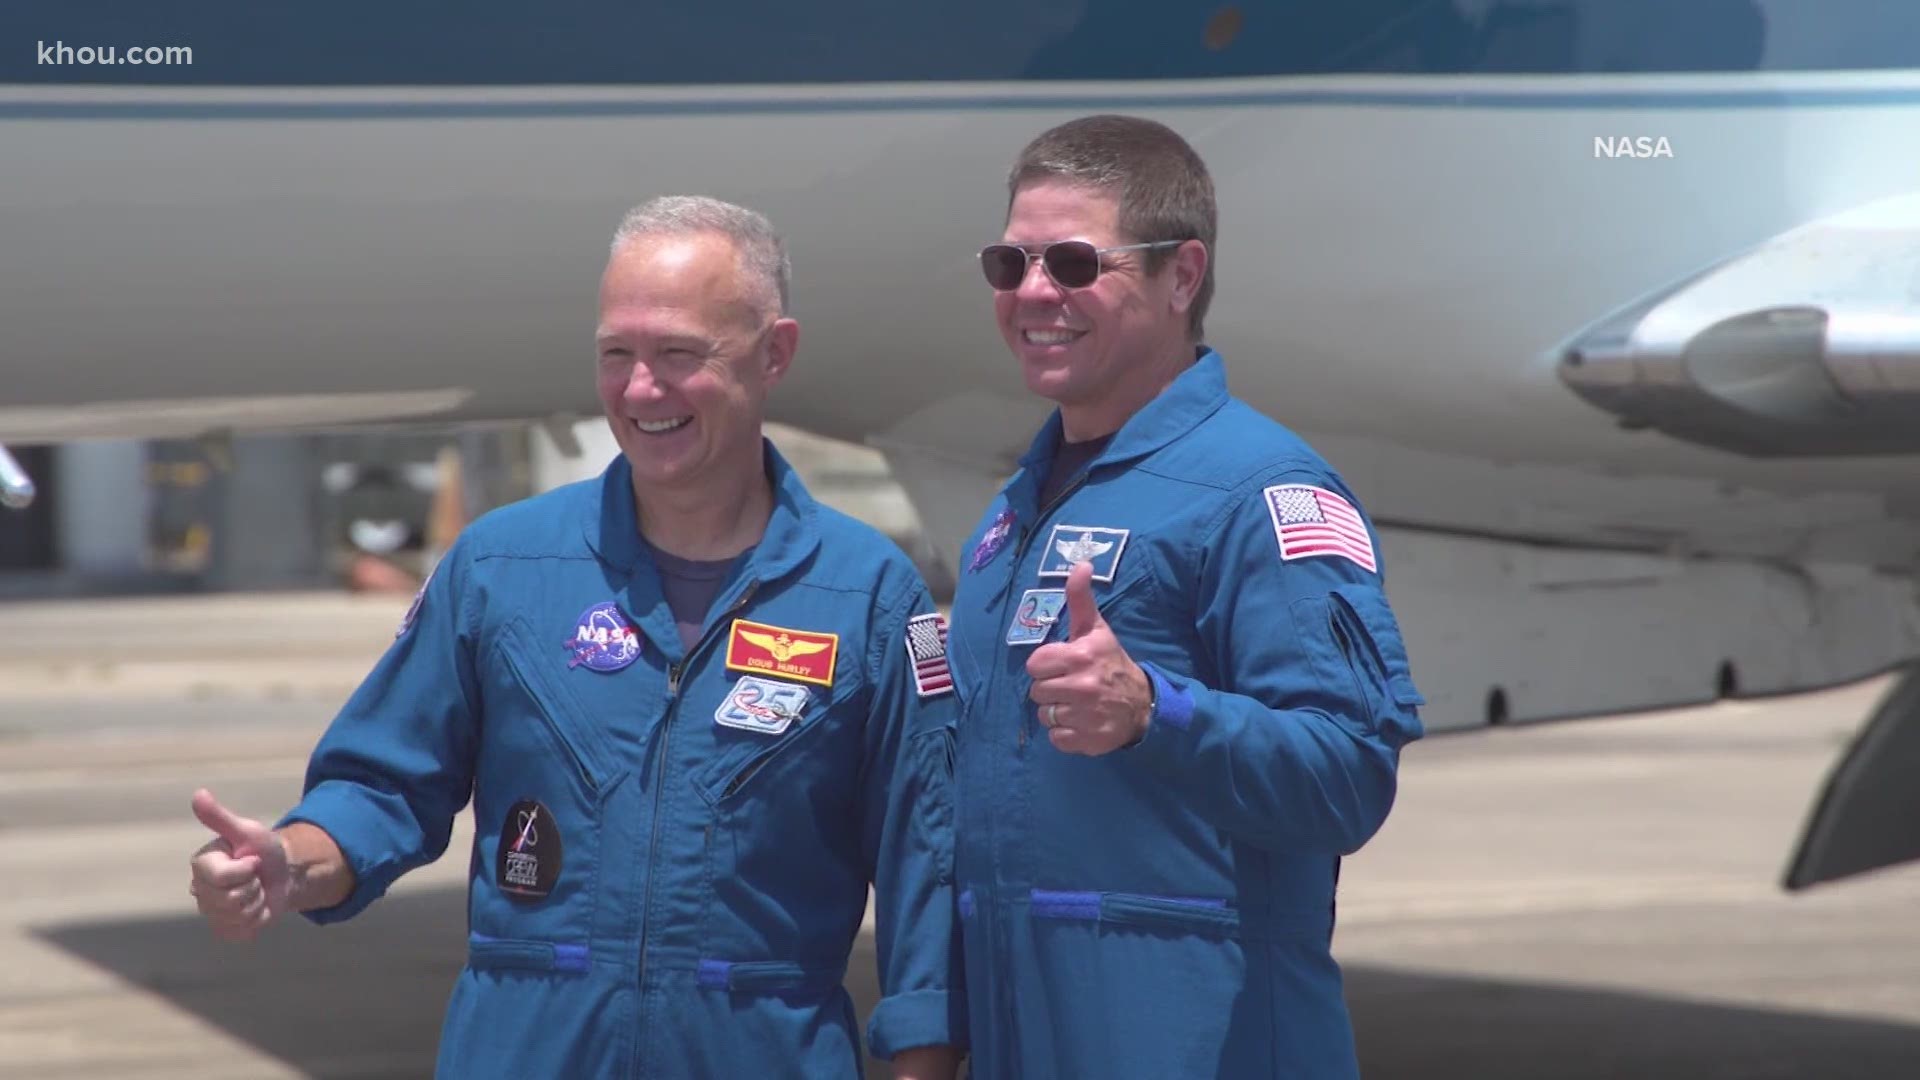 Douglas Hurley and Robert Behnken will fly to the ISS next week in a SpaceX Crew Dragon spacecraft.